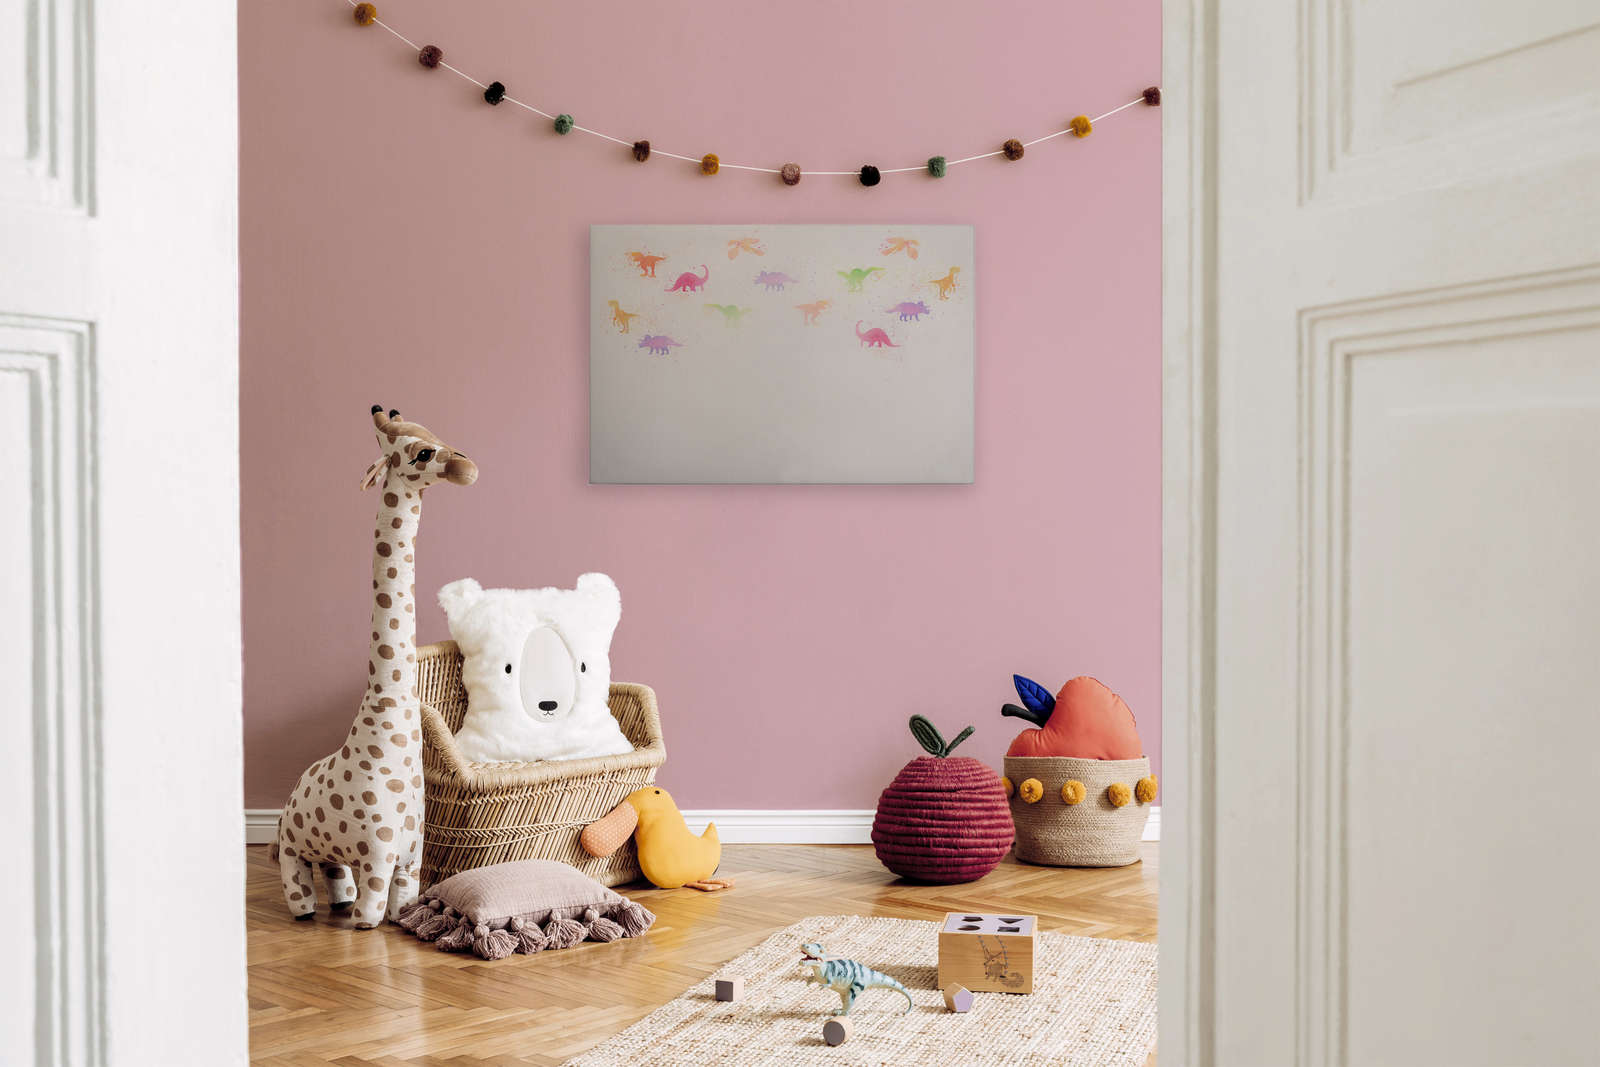             Canvas painting Nursery with little dinosaurs - 0,90 m x 0,60 m
        